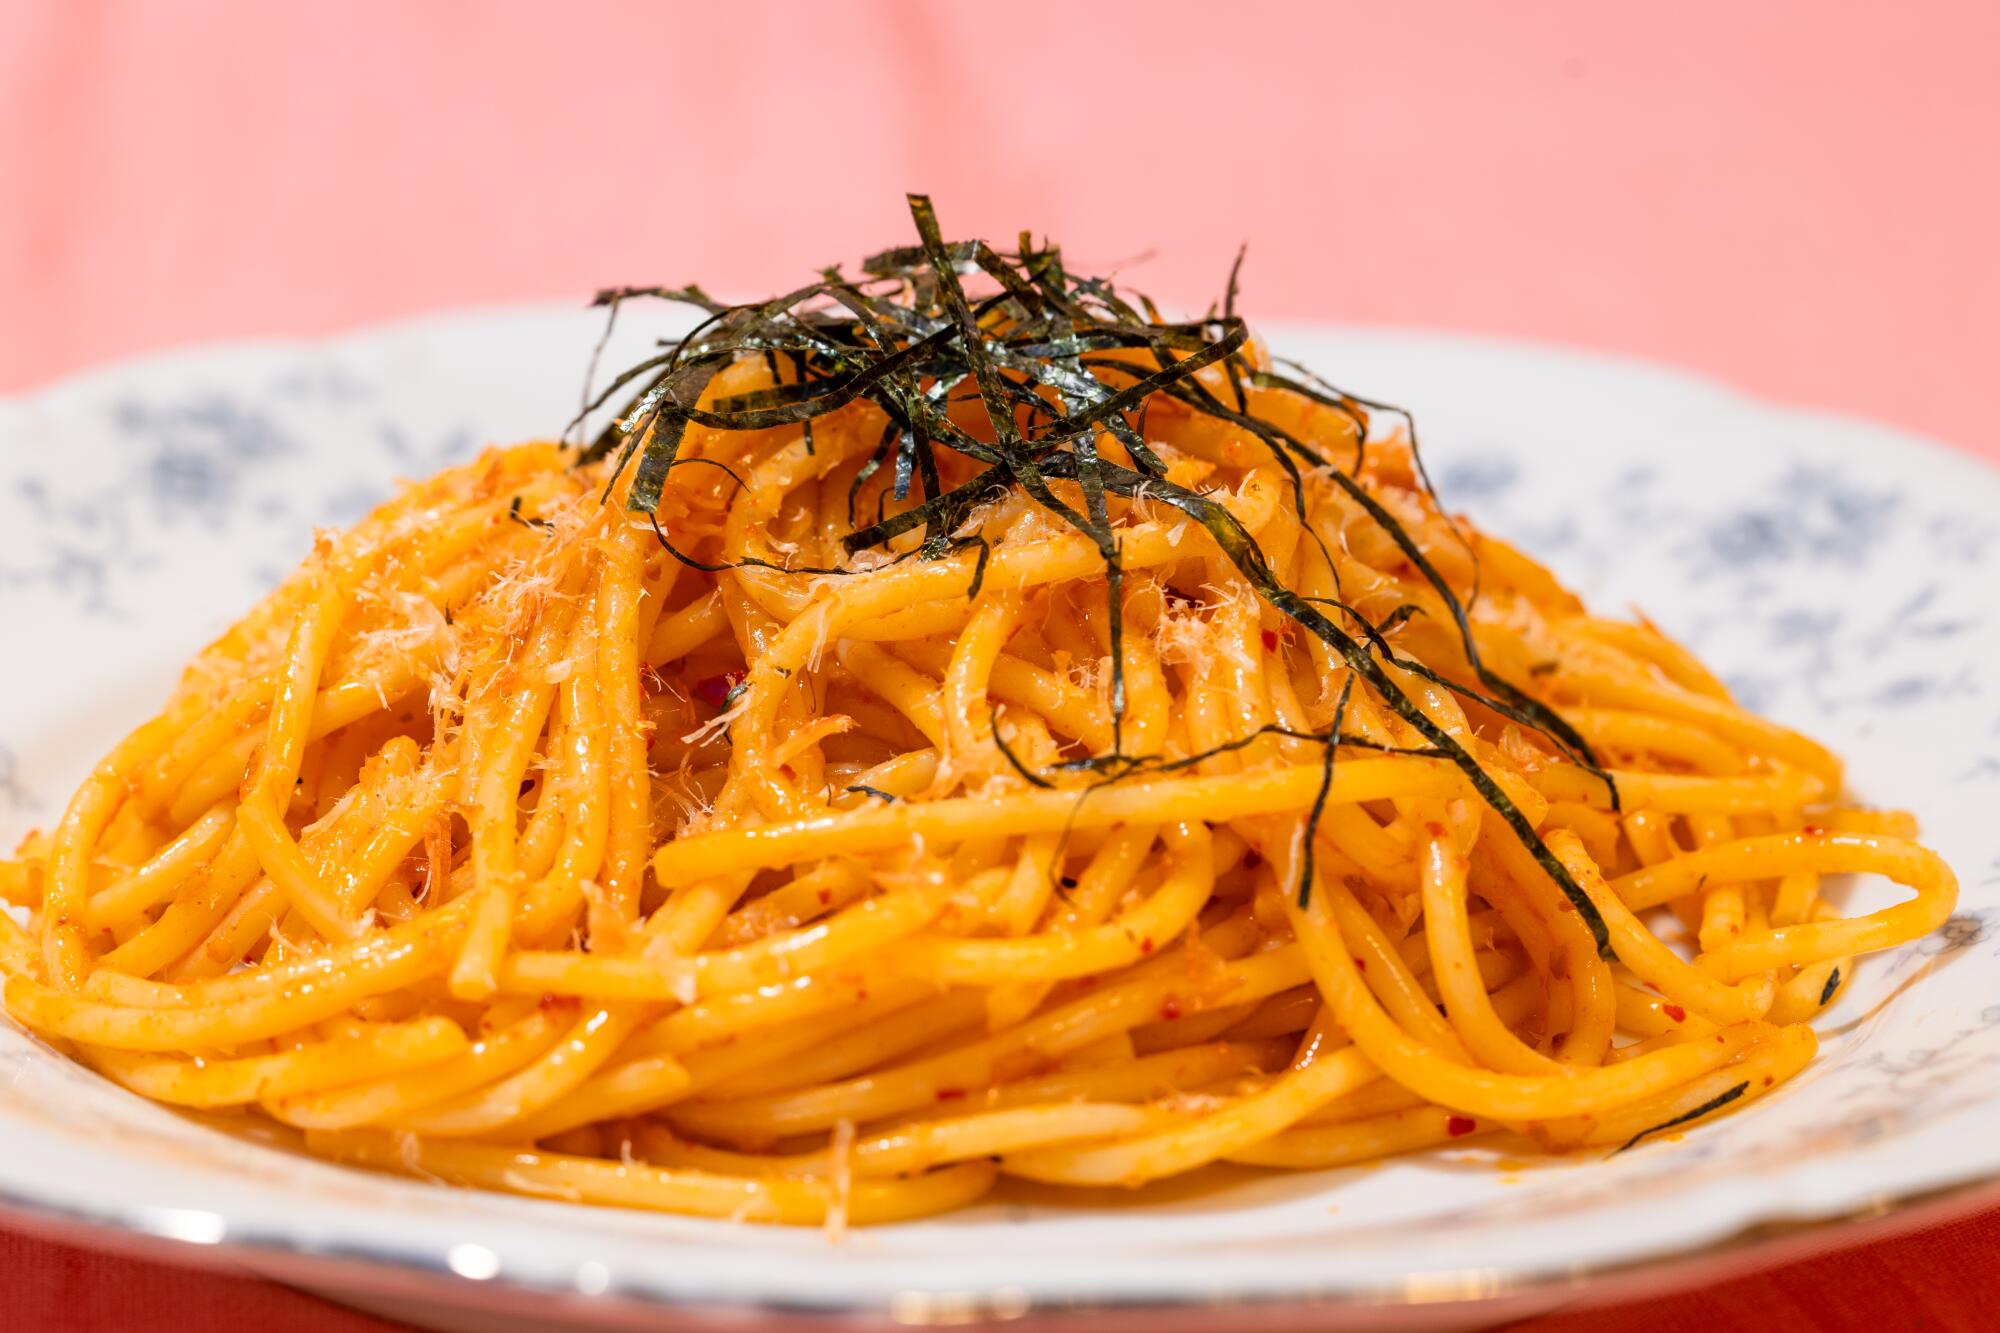 A plate with a pile of orange pasta topped with shreds of nori